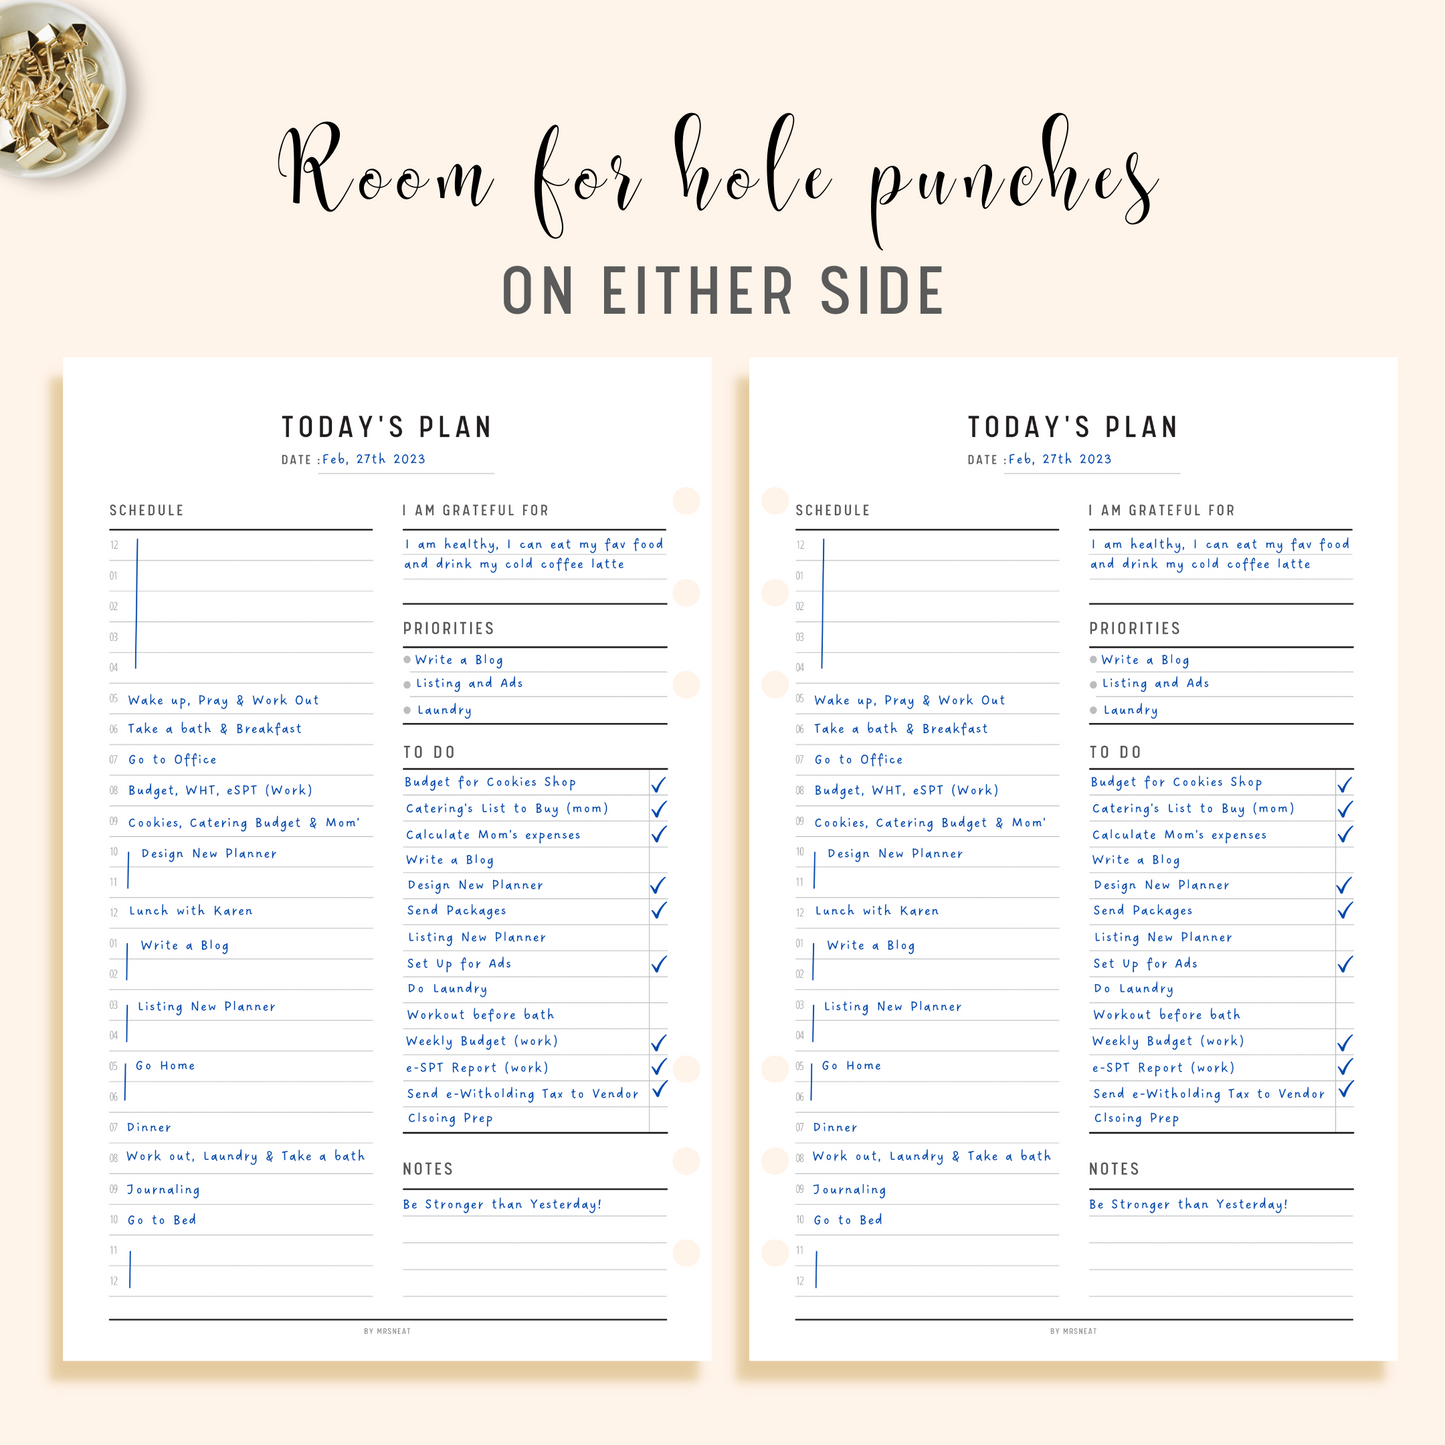 24 Hour Daily Planner Printable with room for hole punches on either side